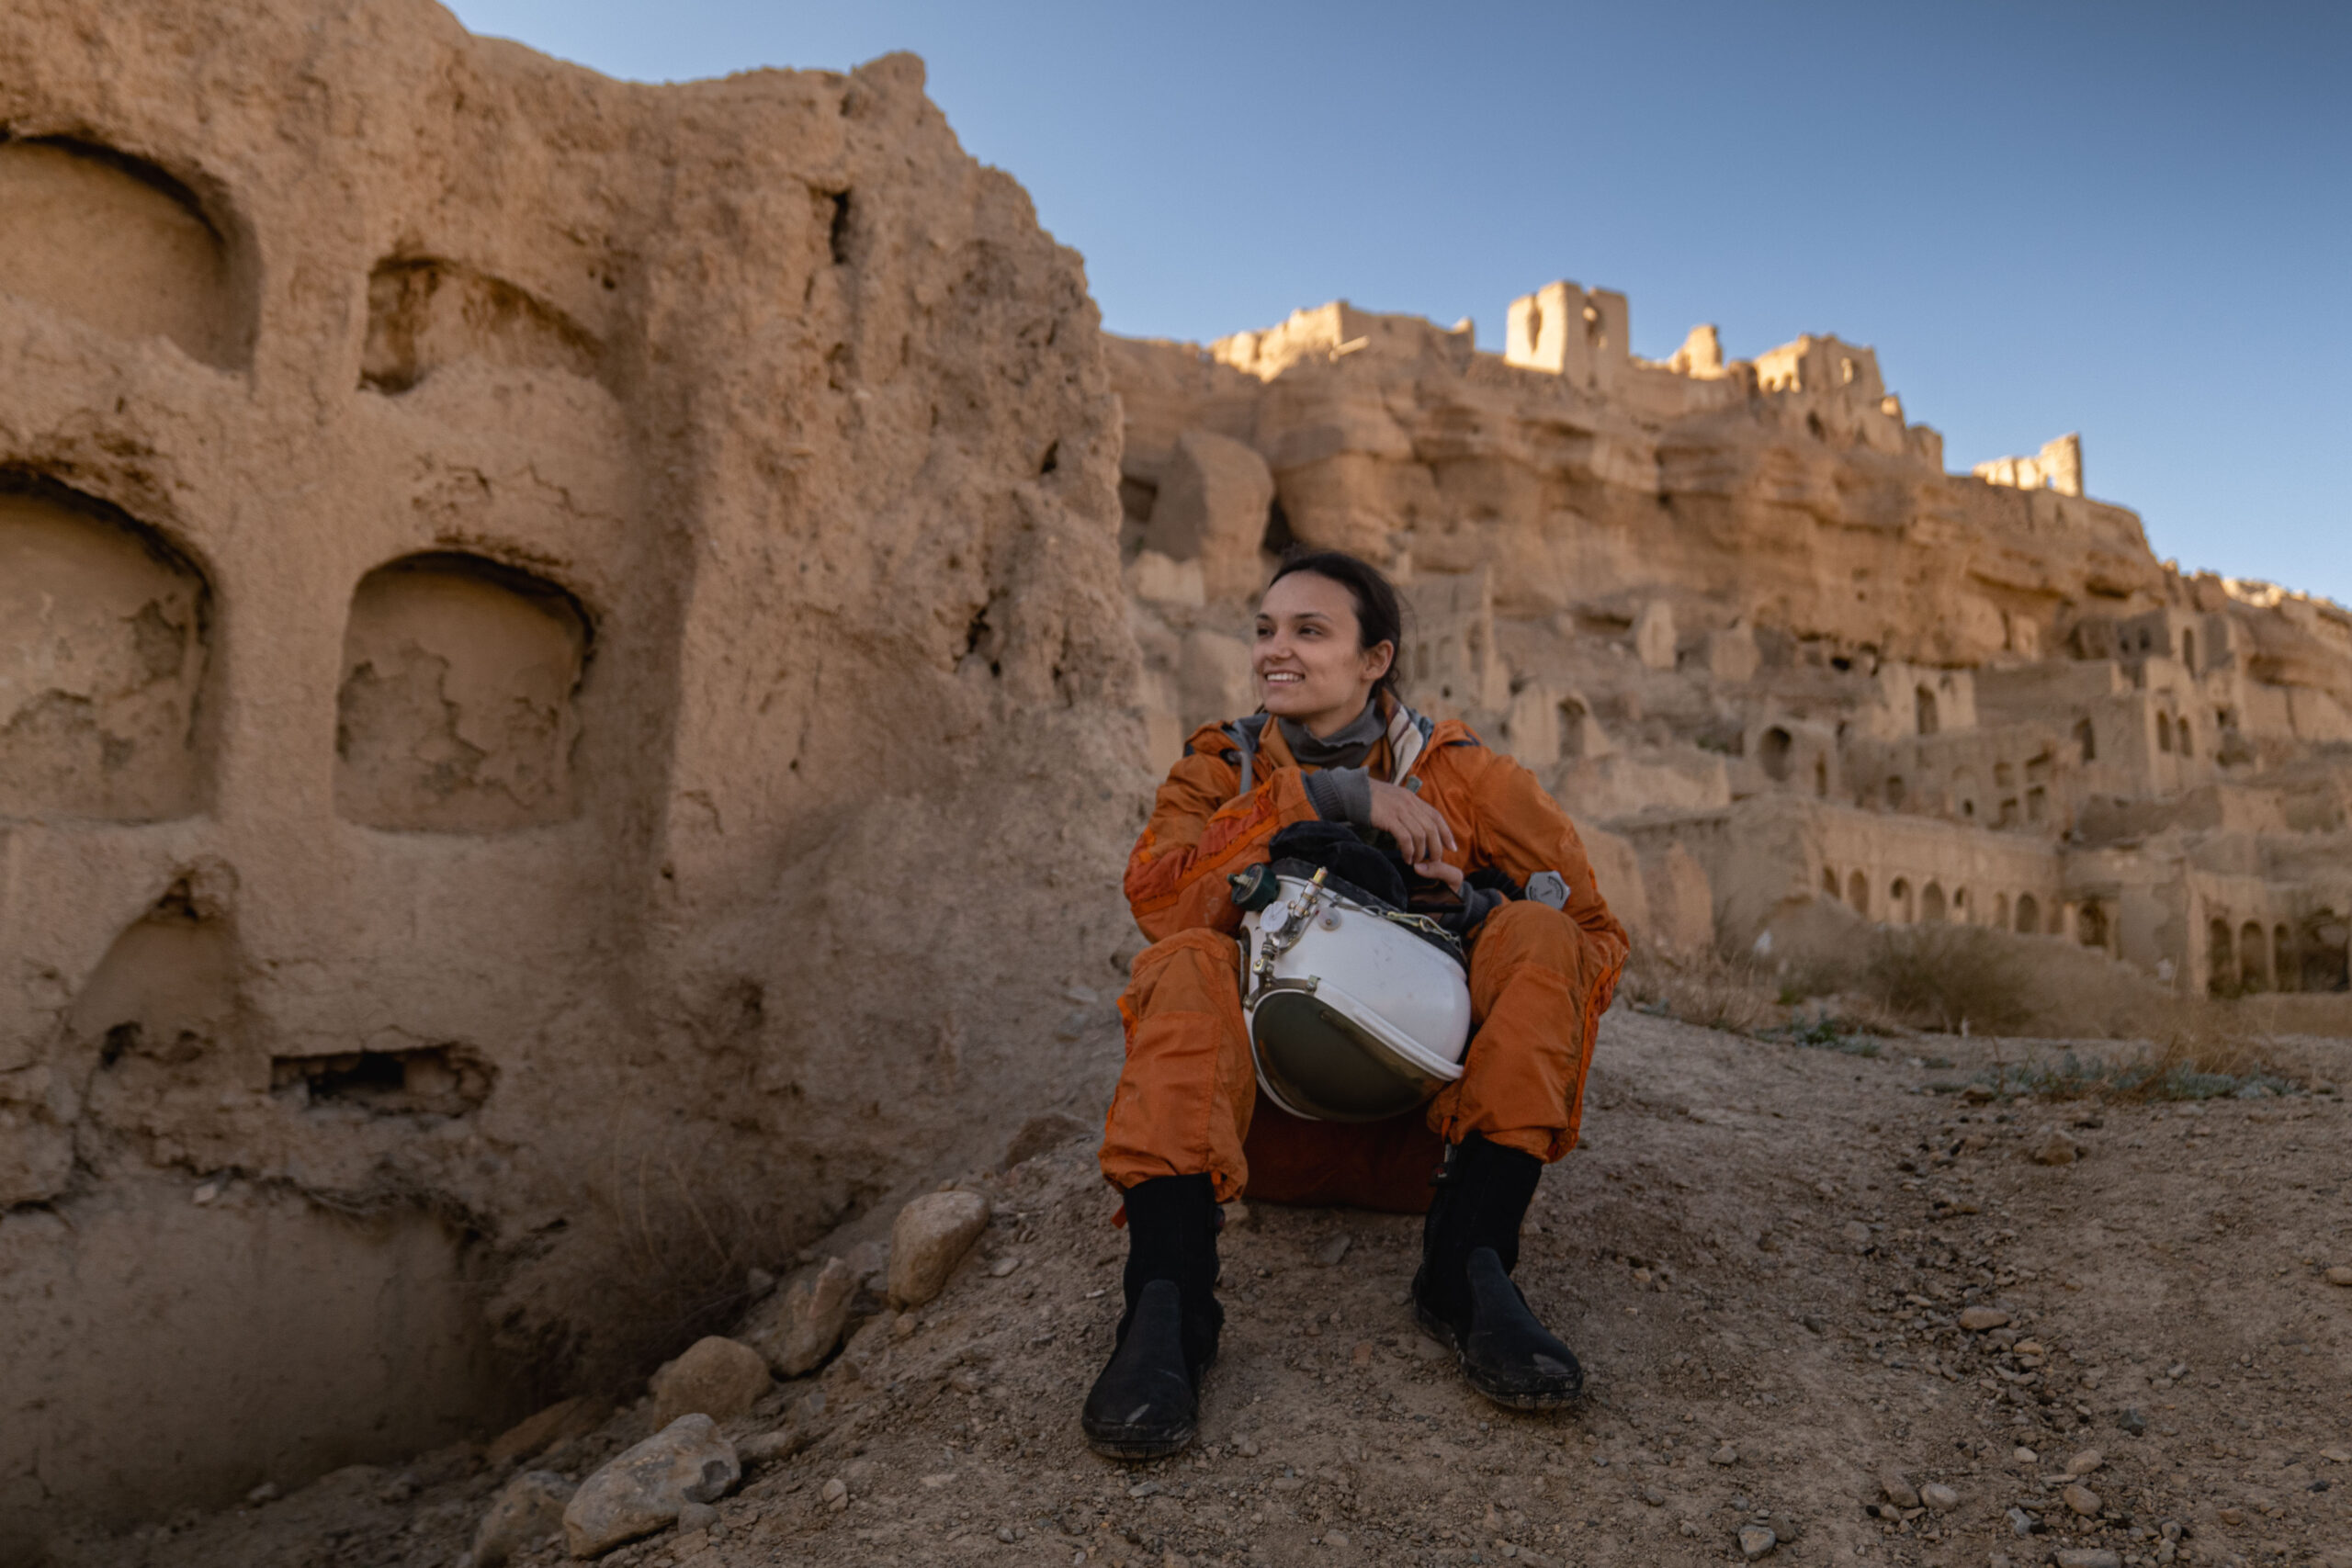 'Astronaut' Bailey O'Bar cools down in the shade during a warm evening at the ruins of a castle in central Iran